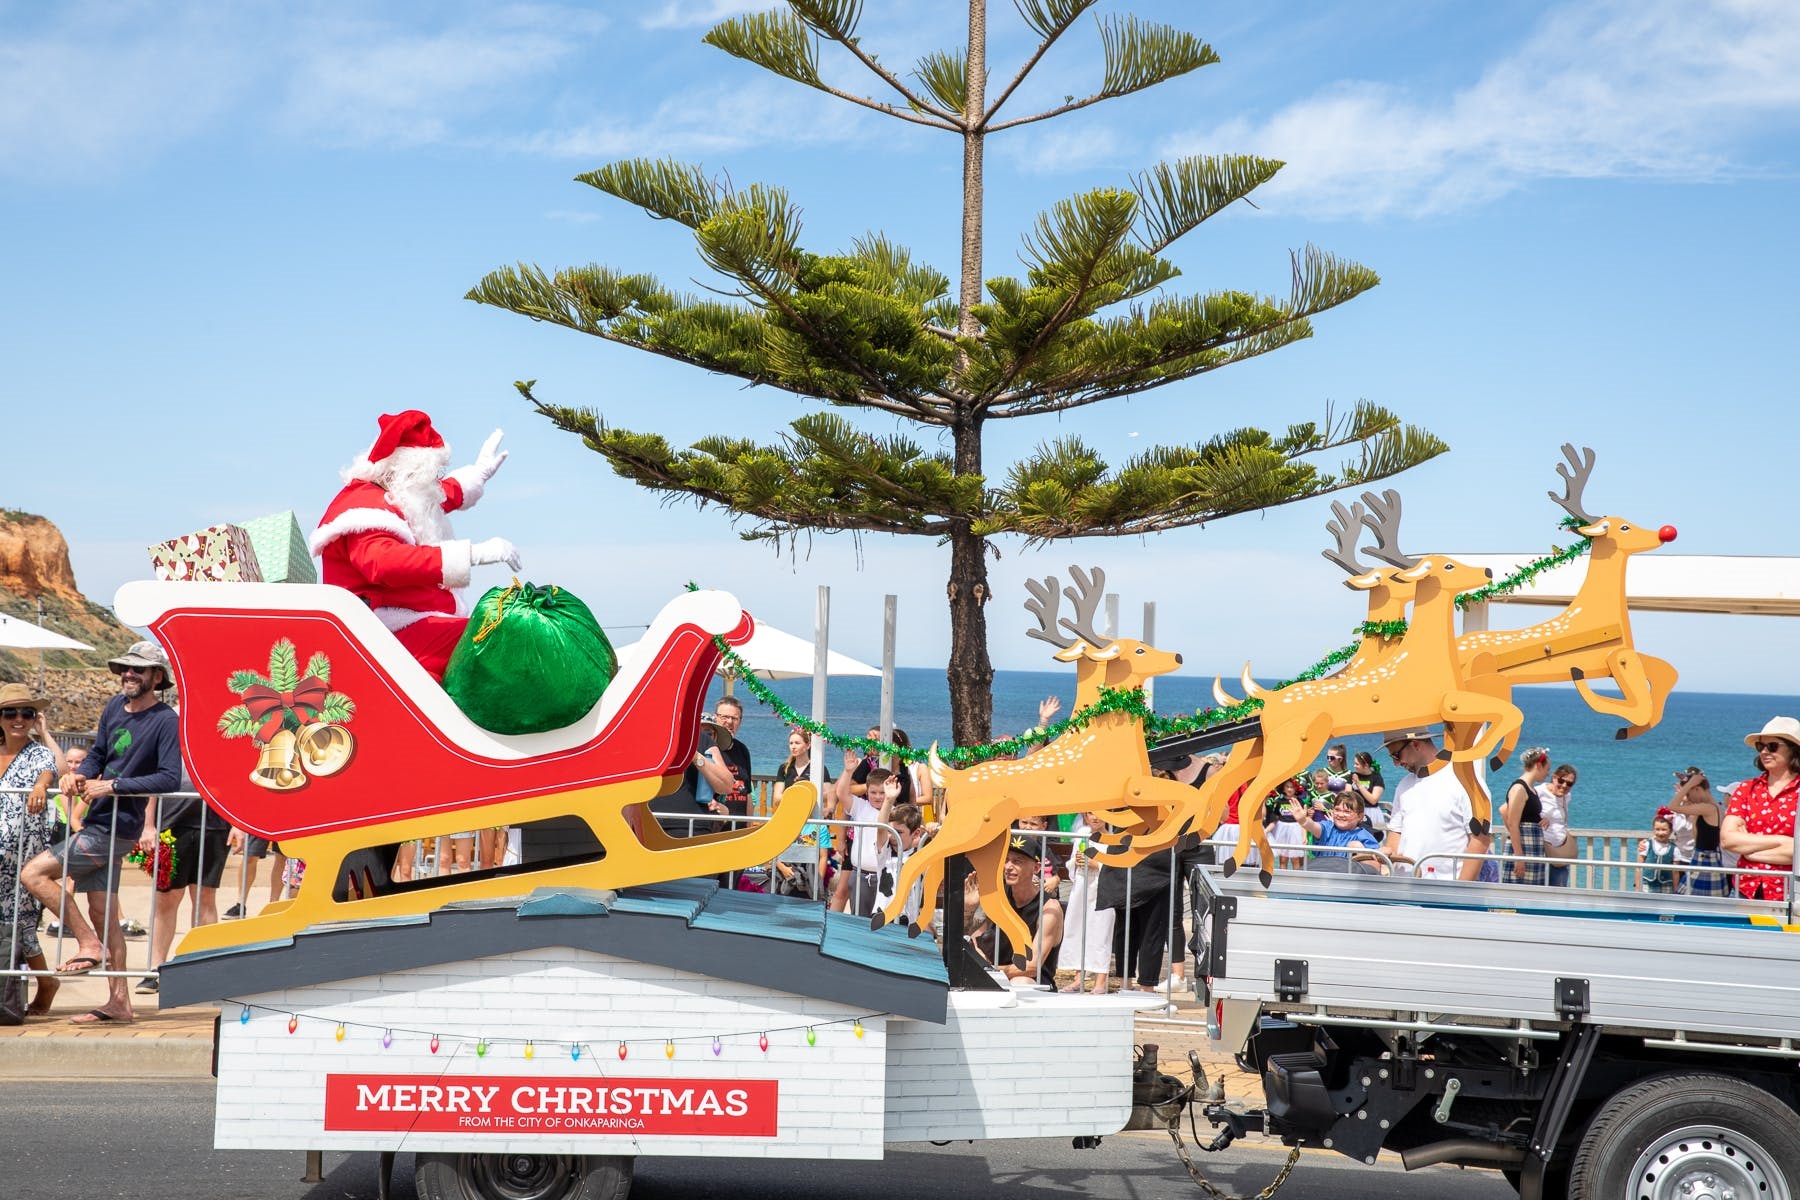 Santa Claus waves to the crowd in his sleigh being pulled on the back of a ute on the Esplanade at Christies Beach.